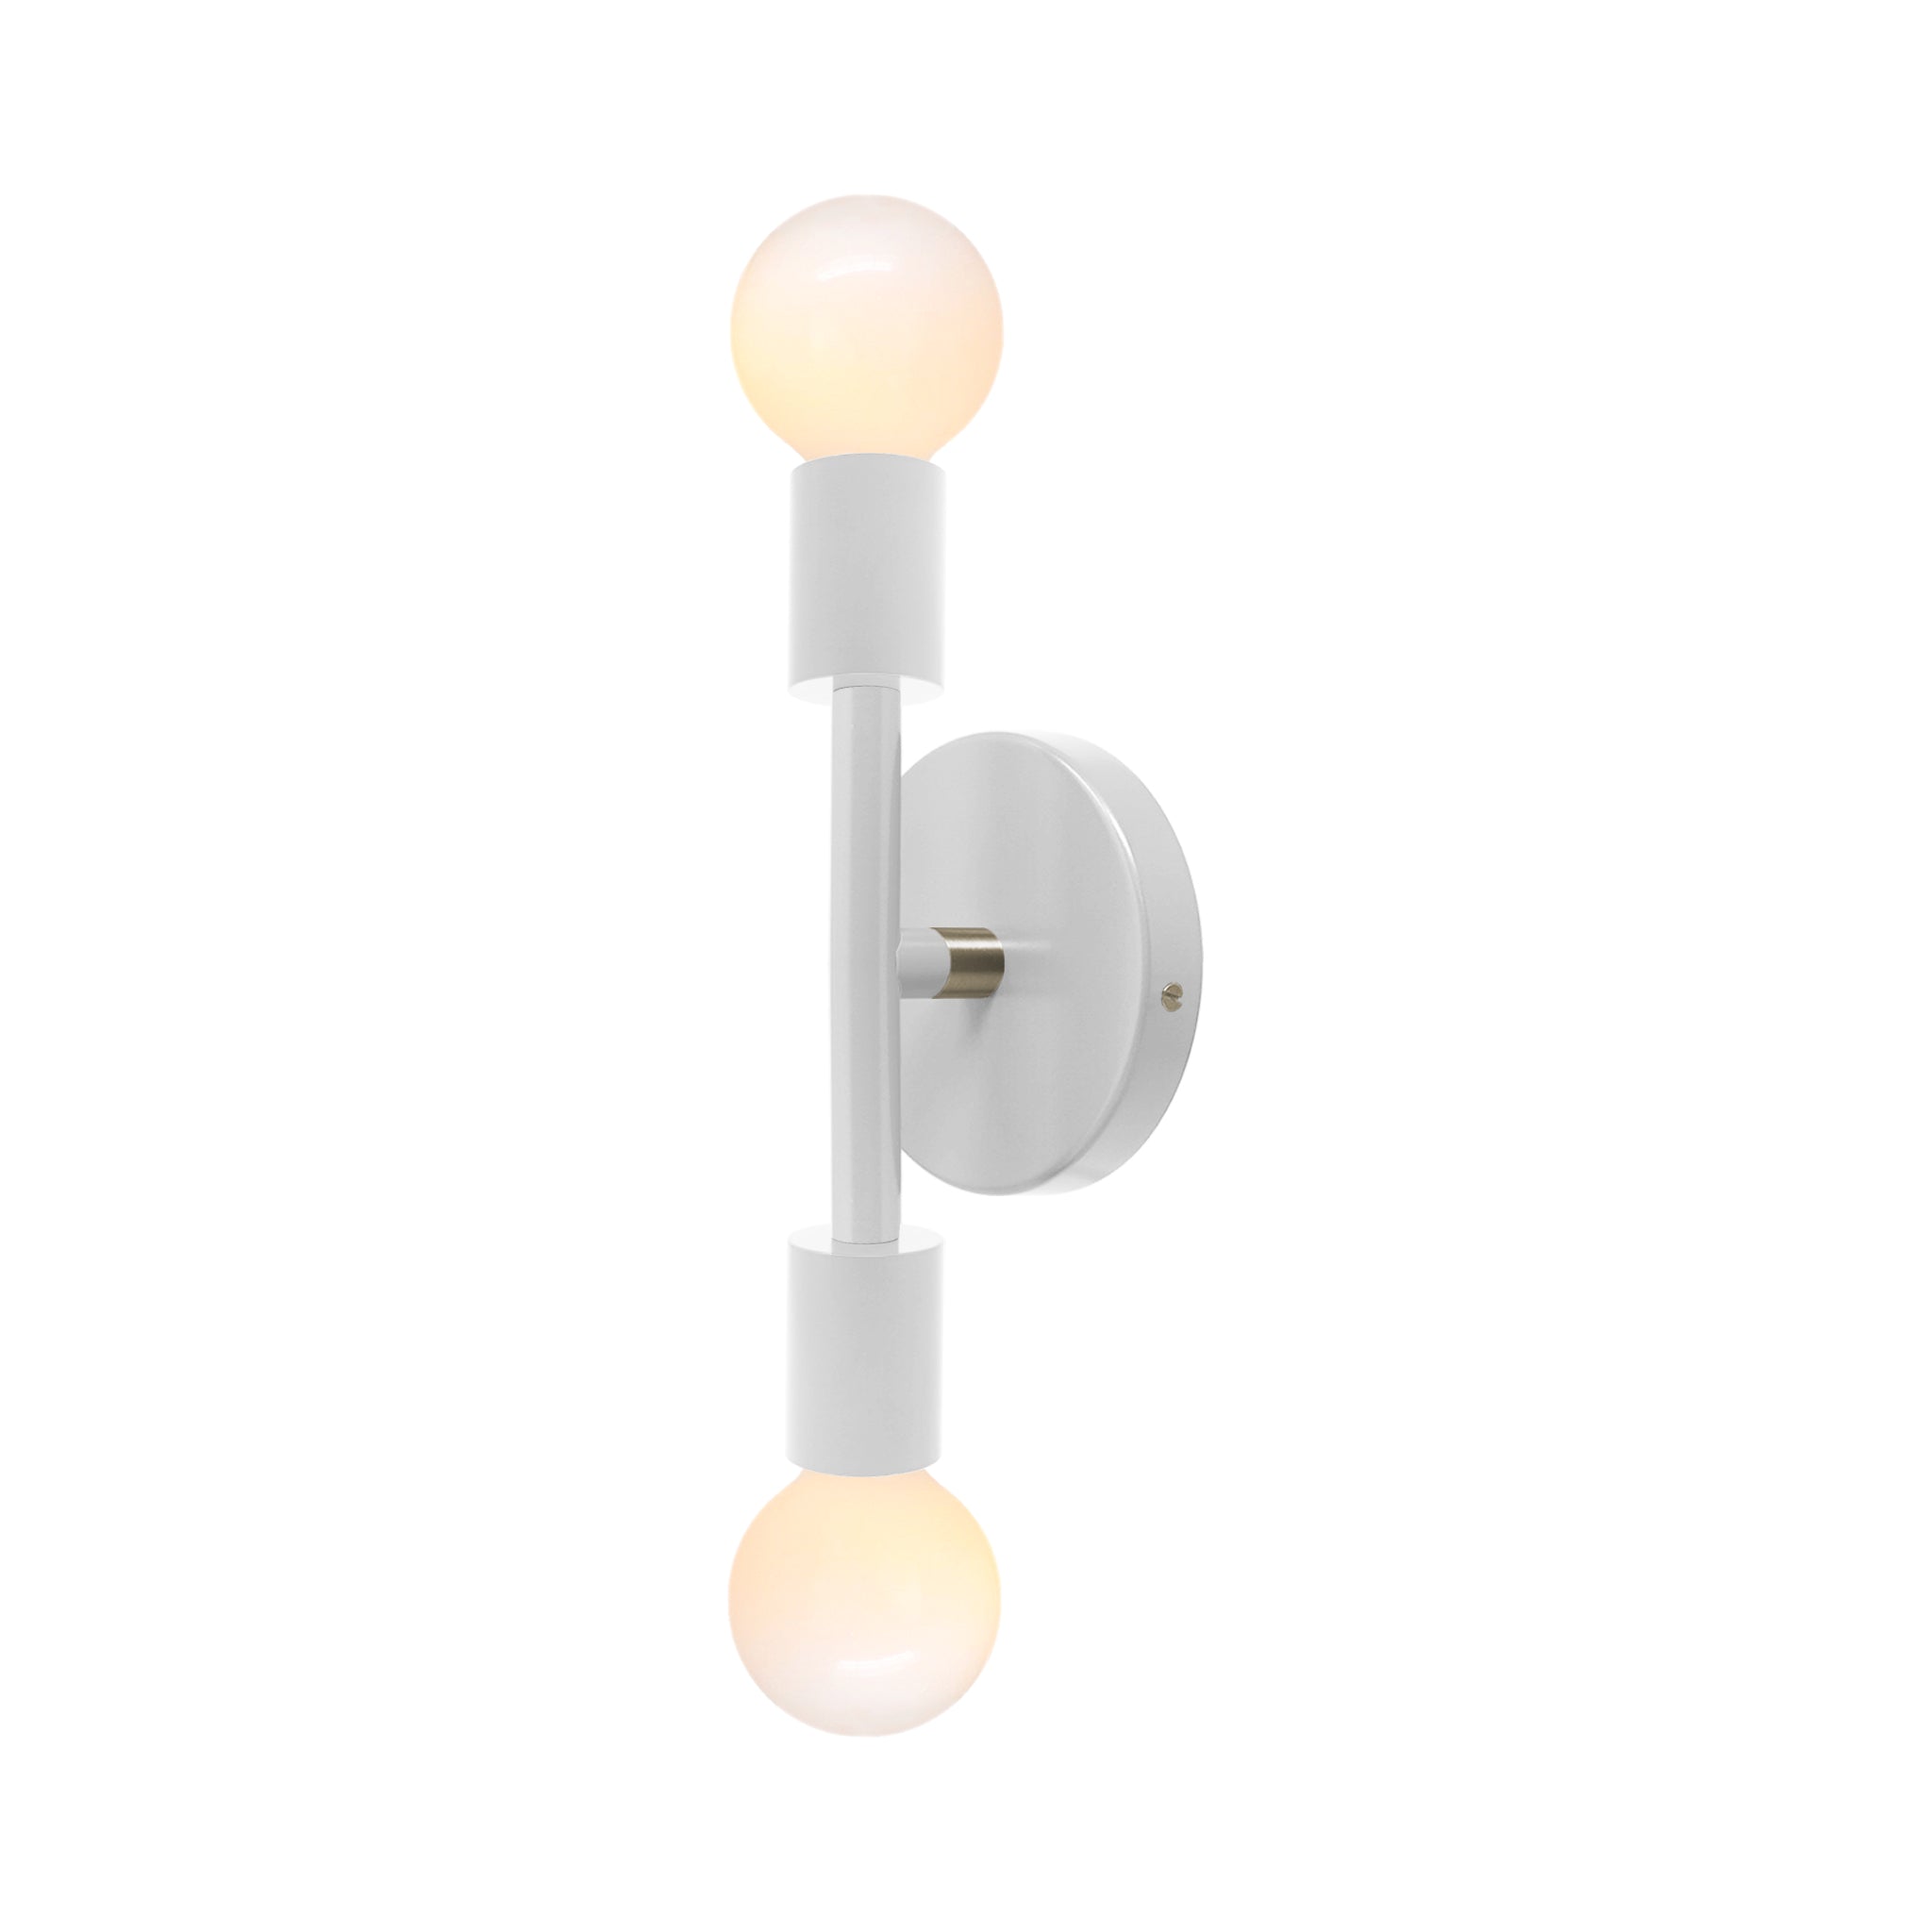 Nickel and barely color Pilot sconce 11" Dutton Brown lighting